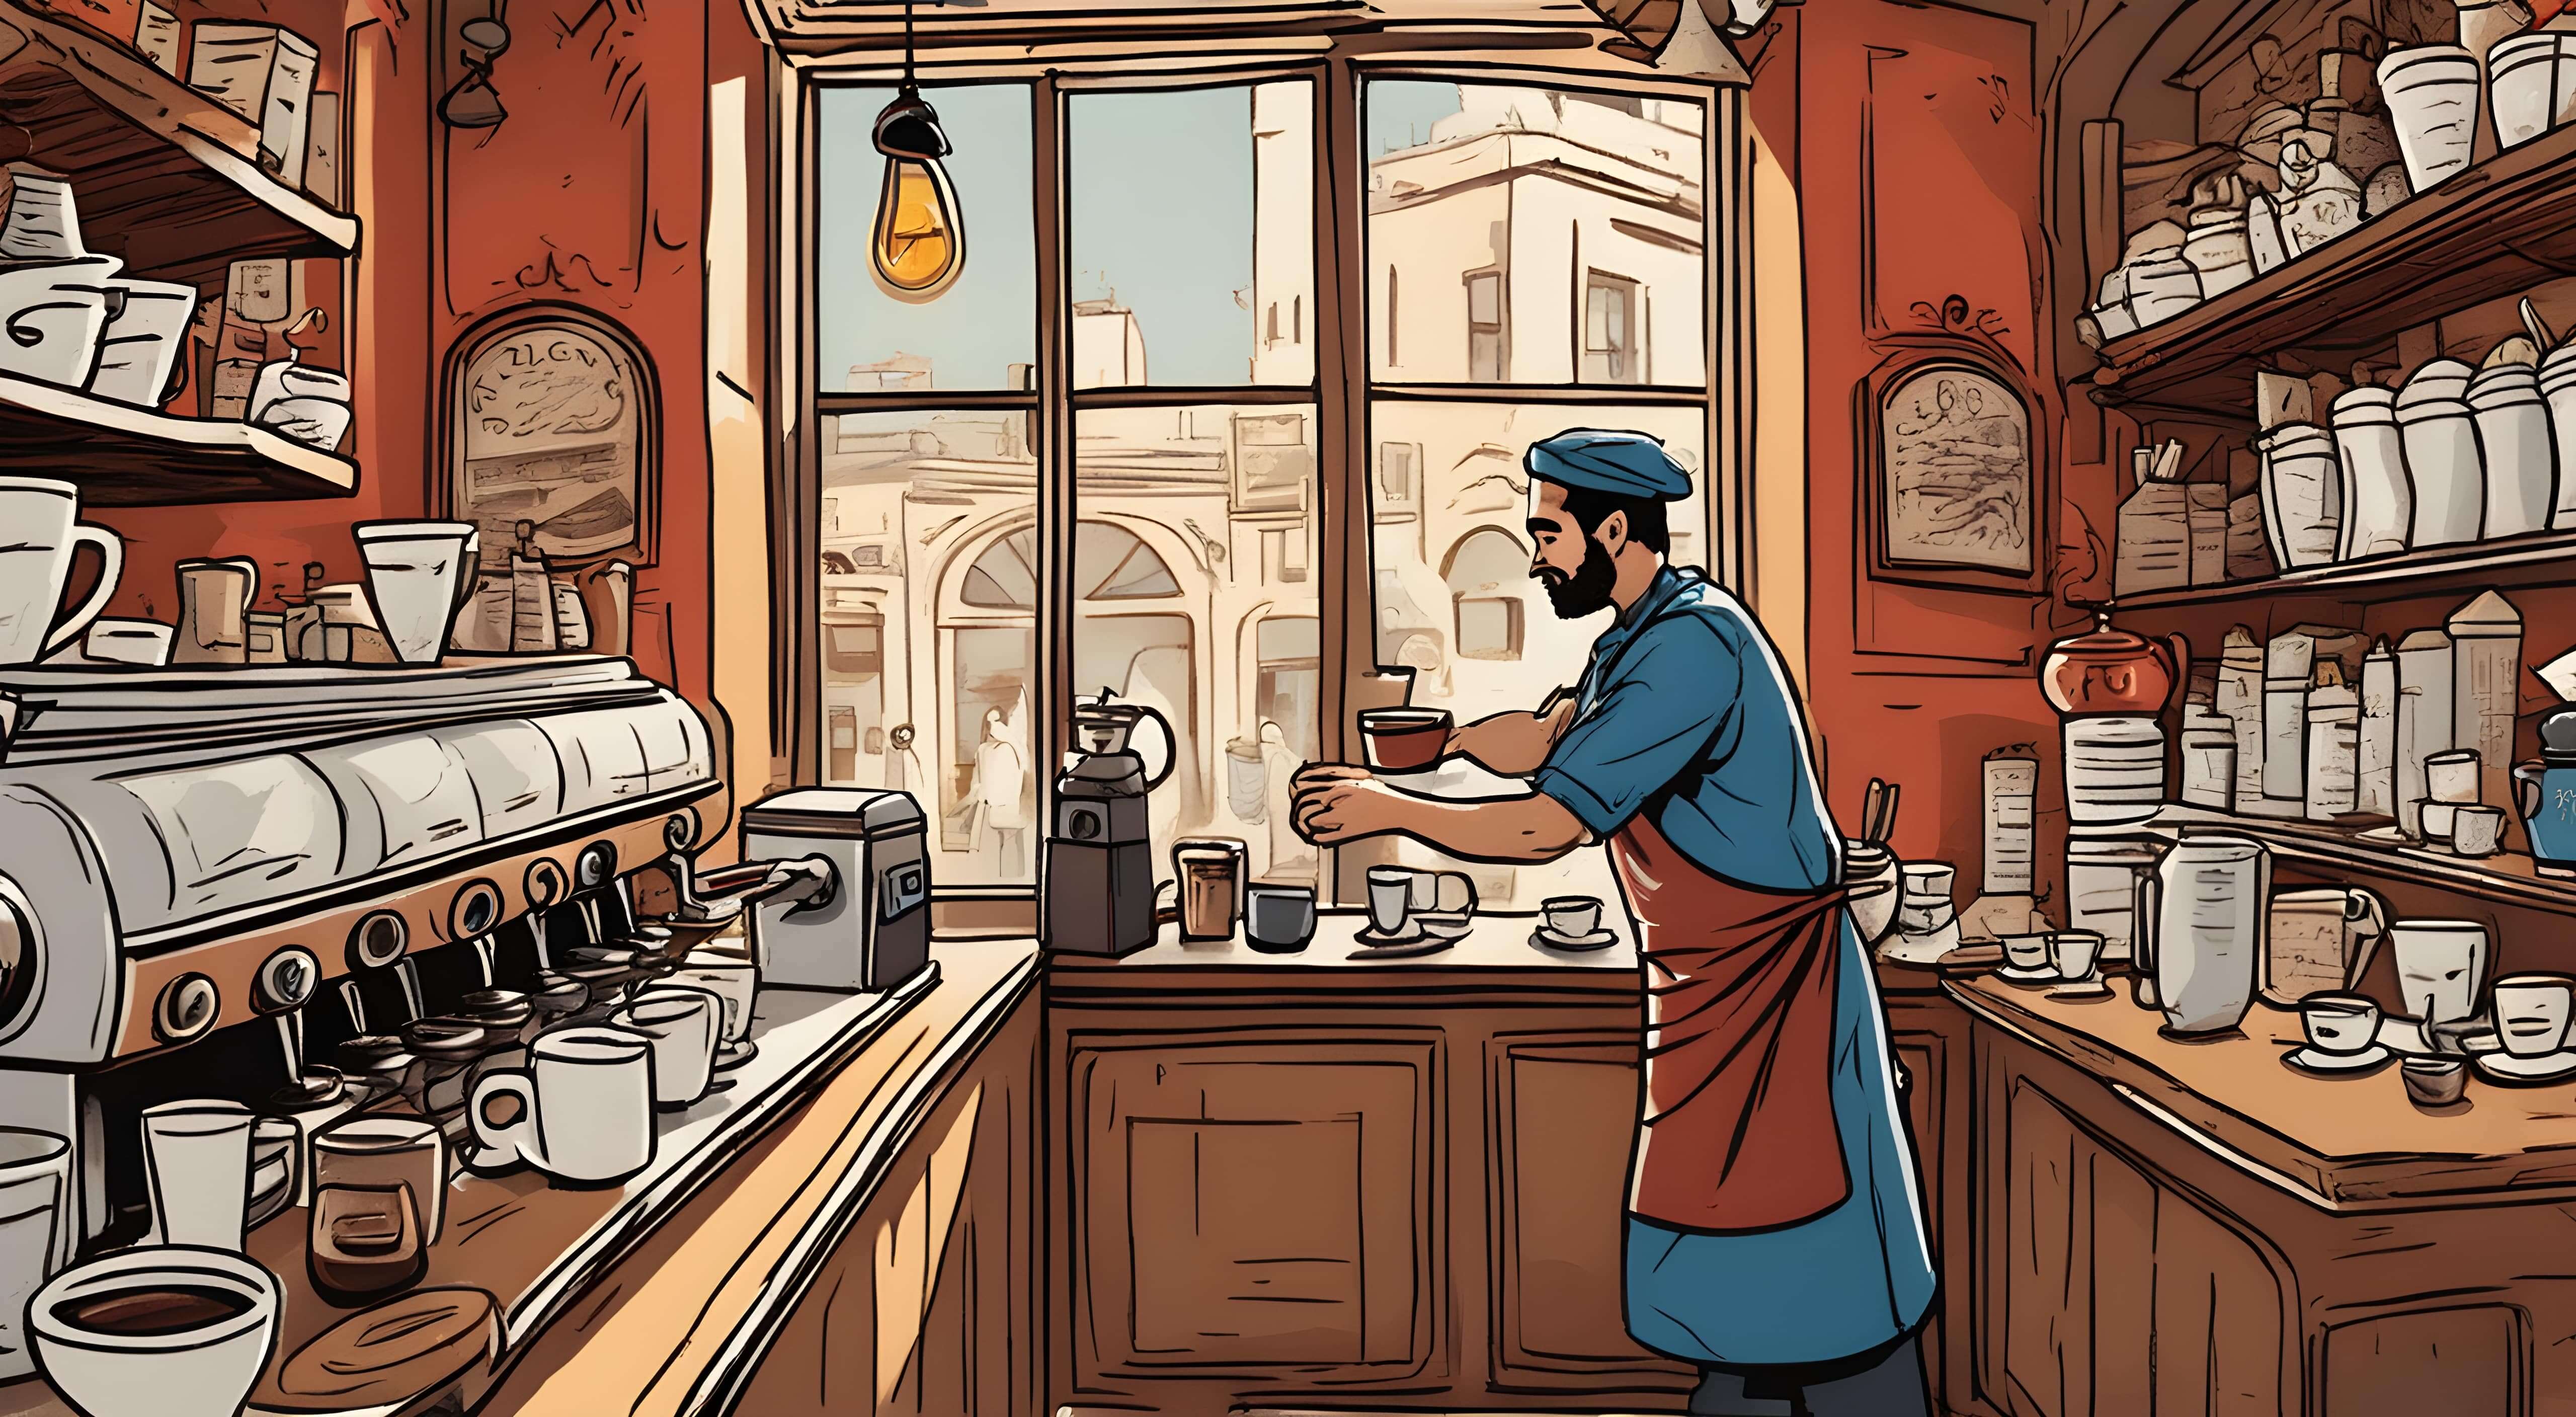 media-a-2d-illustration-of-a-skilled-barista-at-work-in-a-charming-baku-cafe-with-a-backdrop-of-quaint-co-297920656-1-1